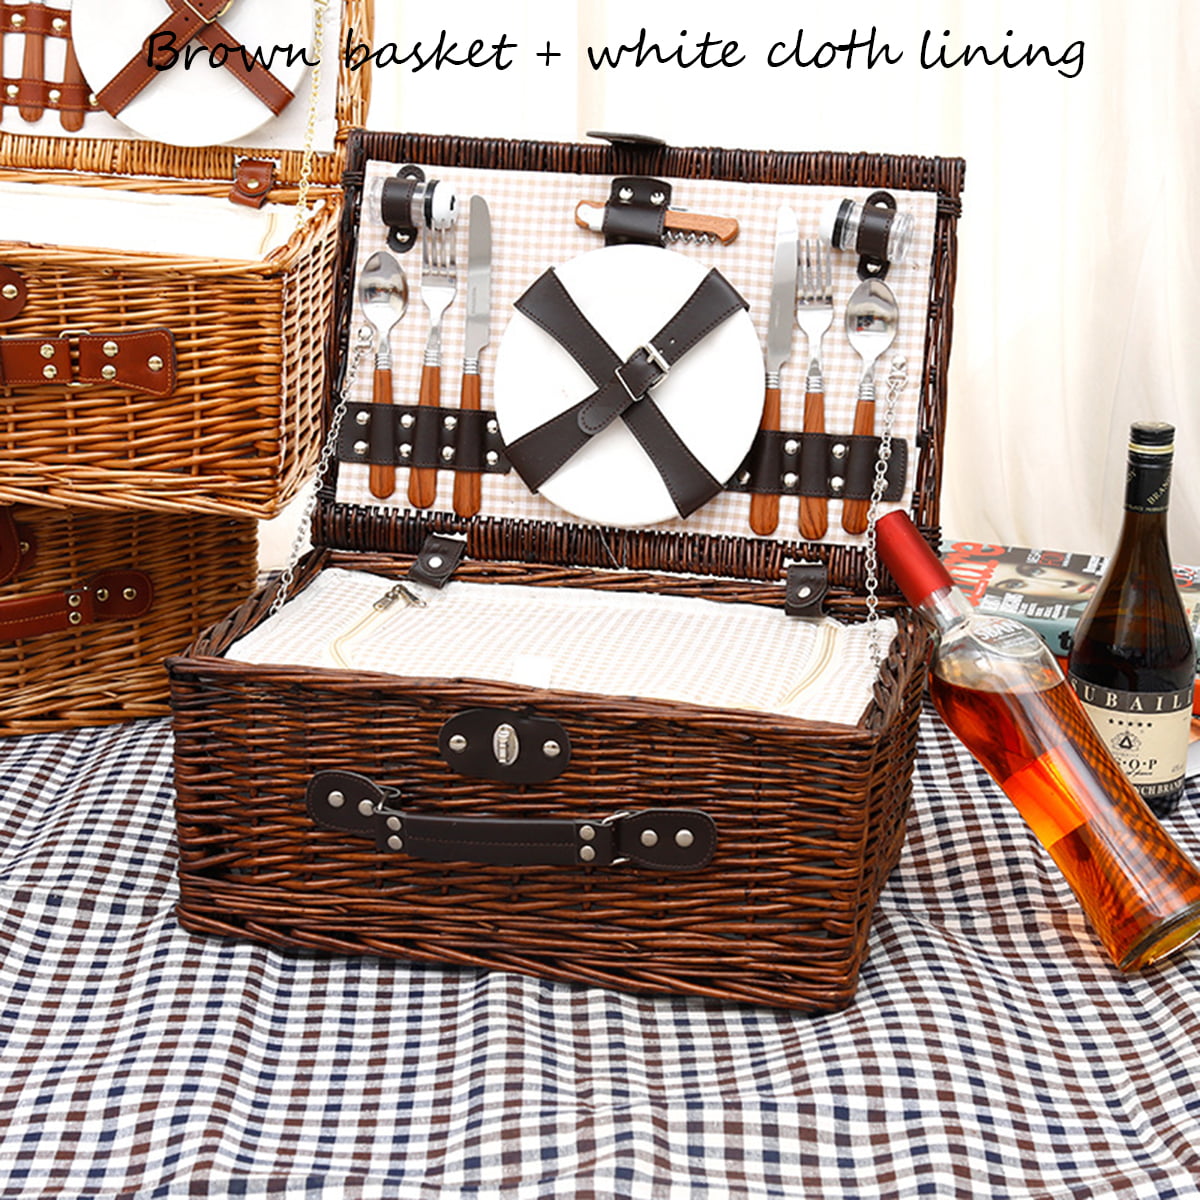 US 2 Person Insulated Picnic Basket Set Wicker Basket Camping Outdoor Willow Bag 